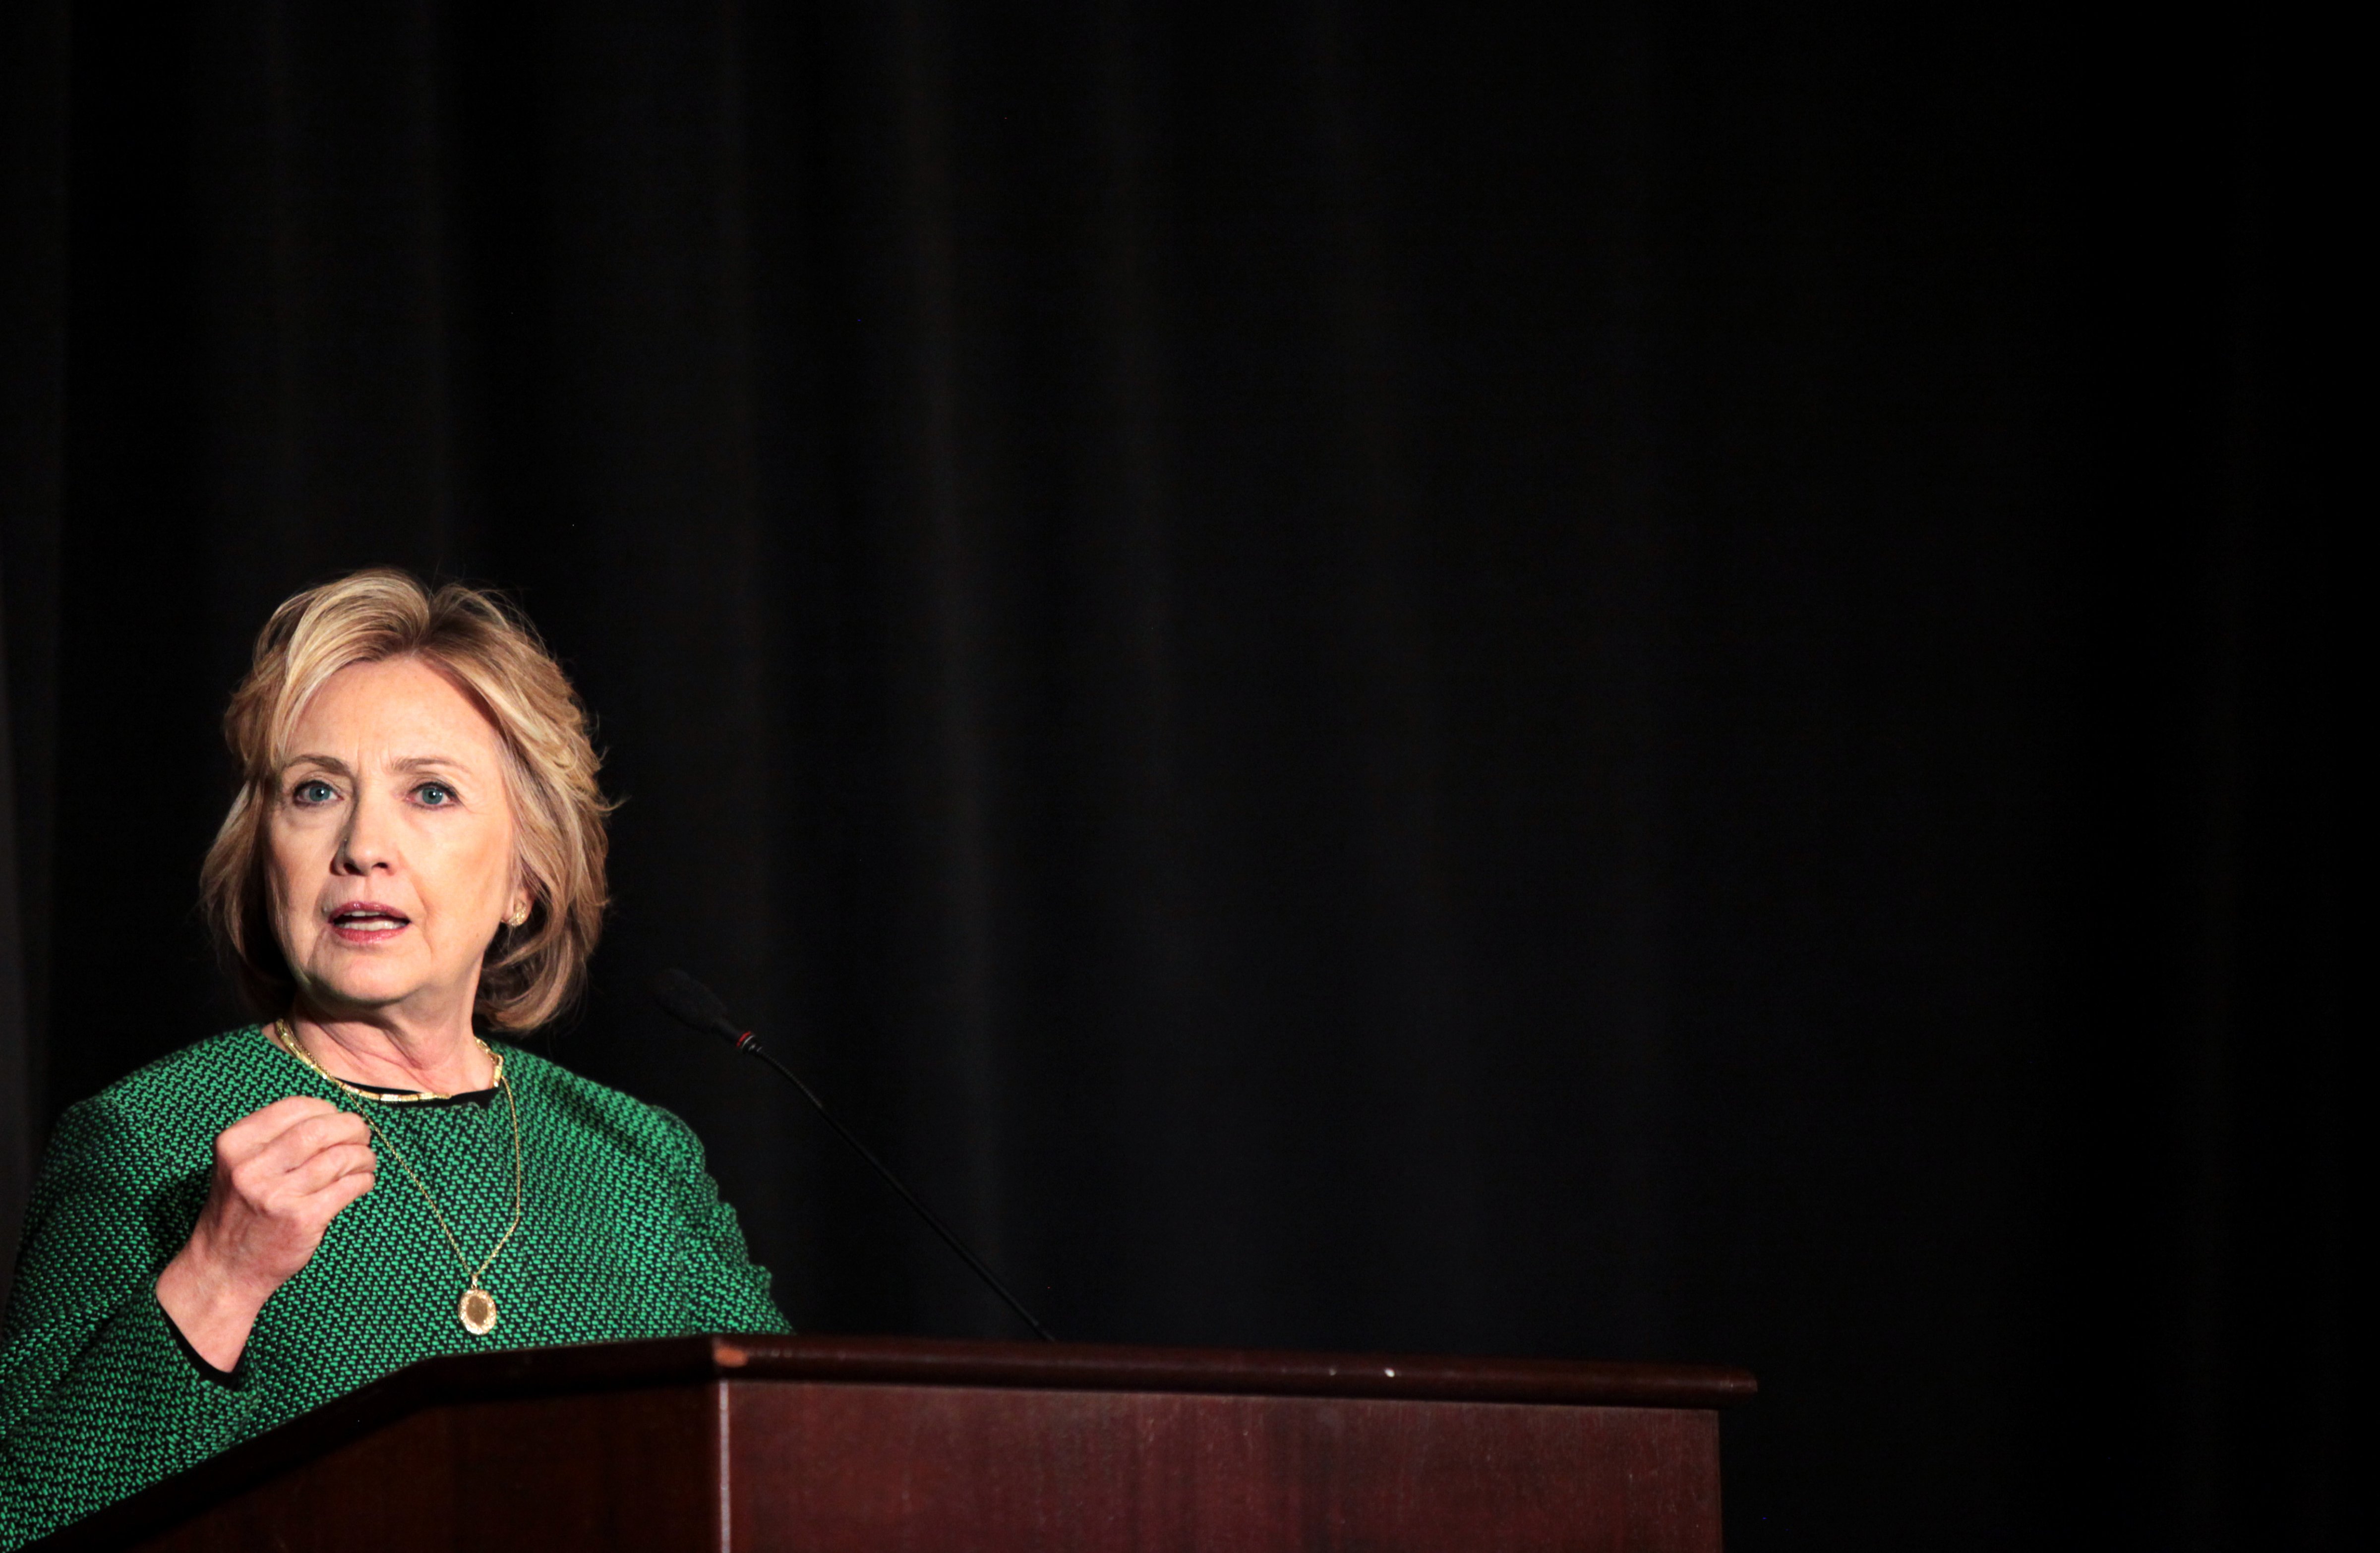 Former Secretary of State Hillary Clinton speaks on stage during a ceremony to induct her into the Irish America Hall of Fame on March 16, 2015 in New York City. (Yana Paskova—Getty Images)